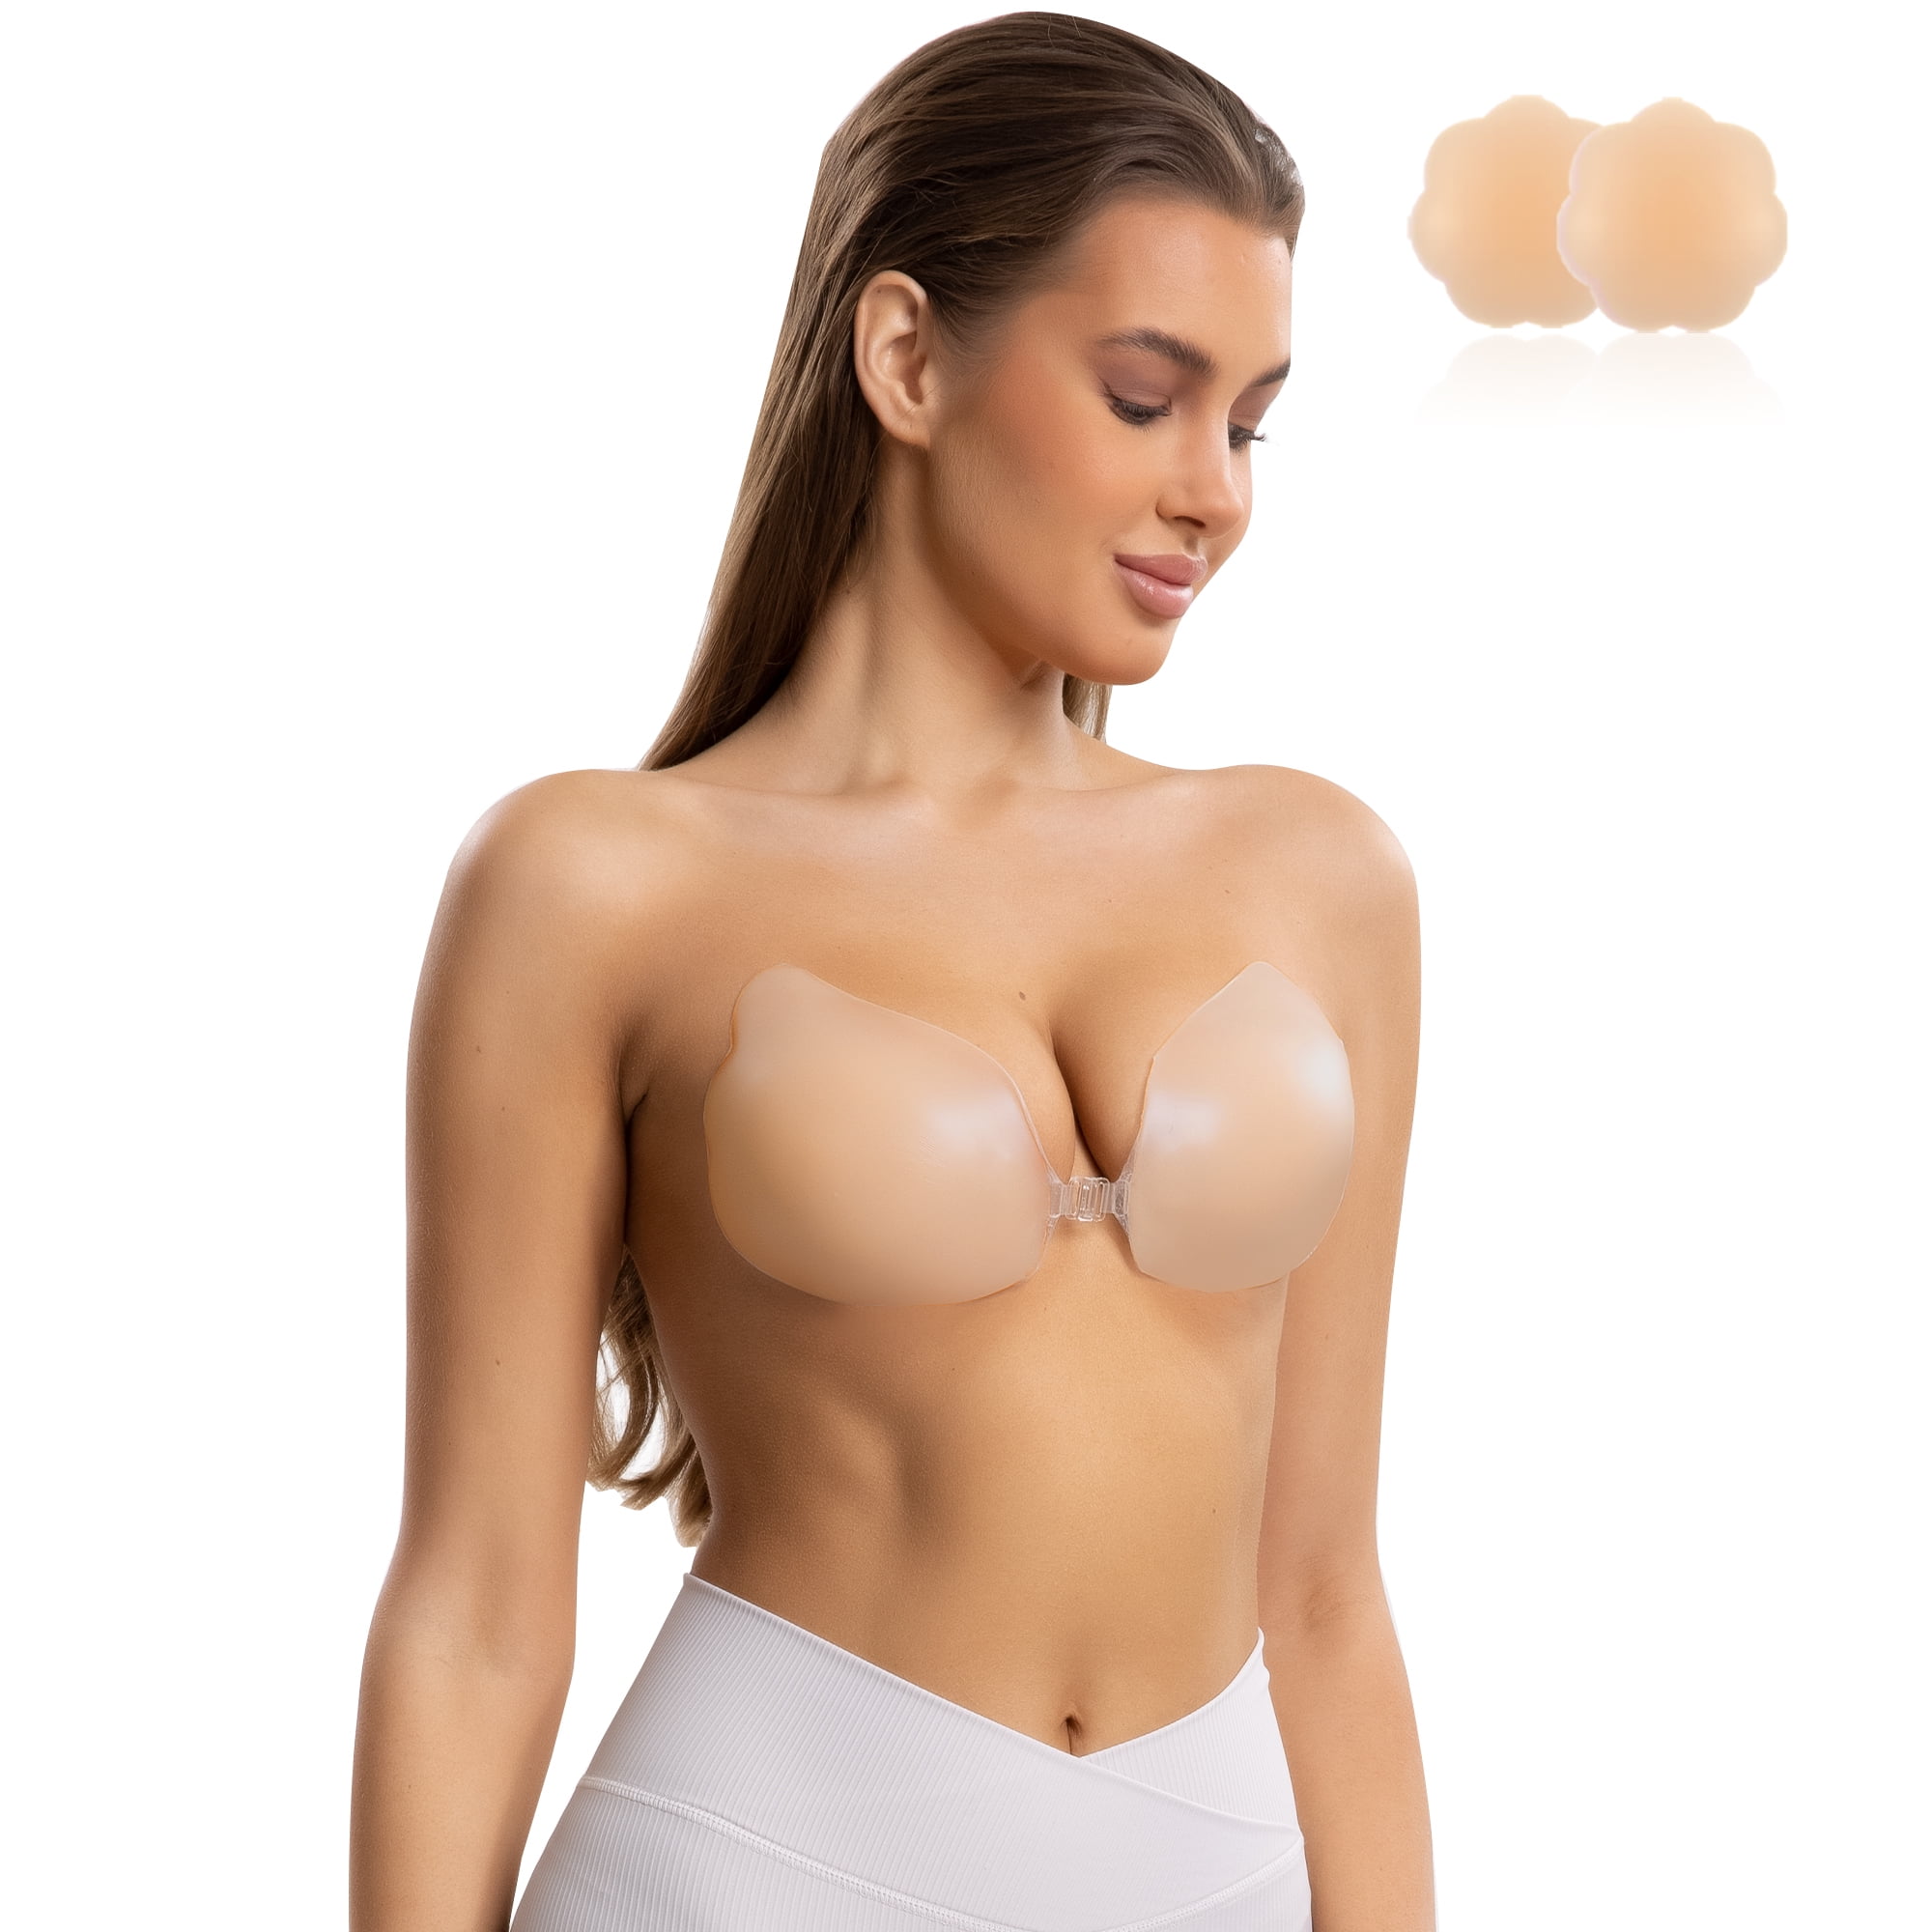 Lingerie Solutions Women's Silicone Skin Adhesive Backless